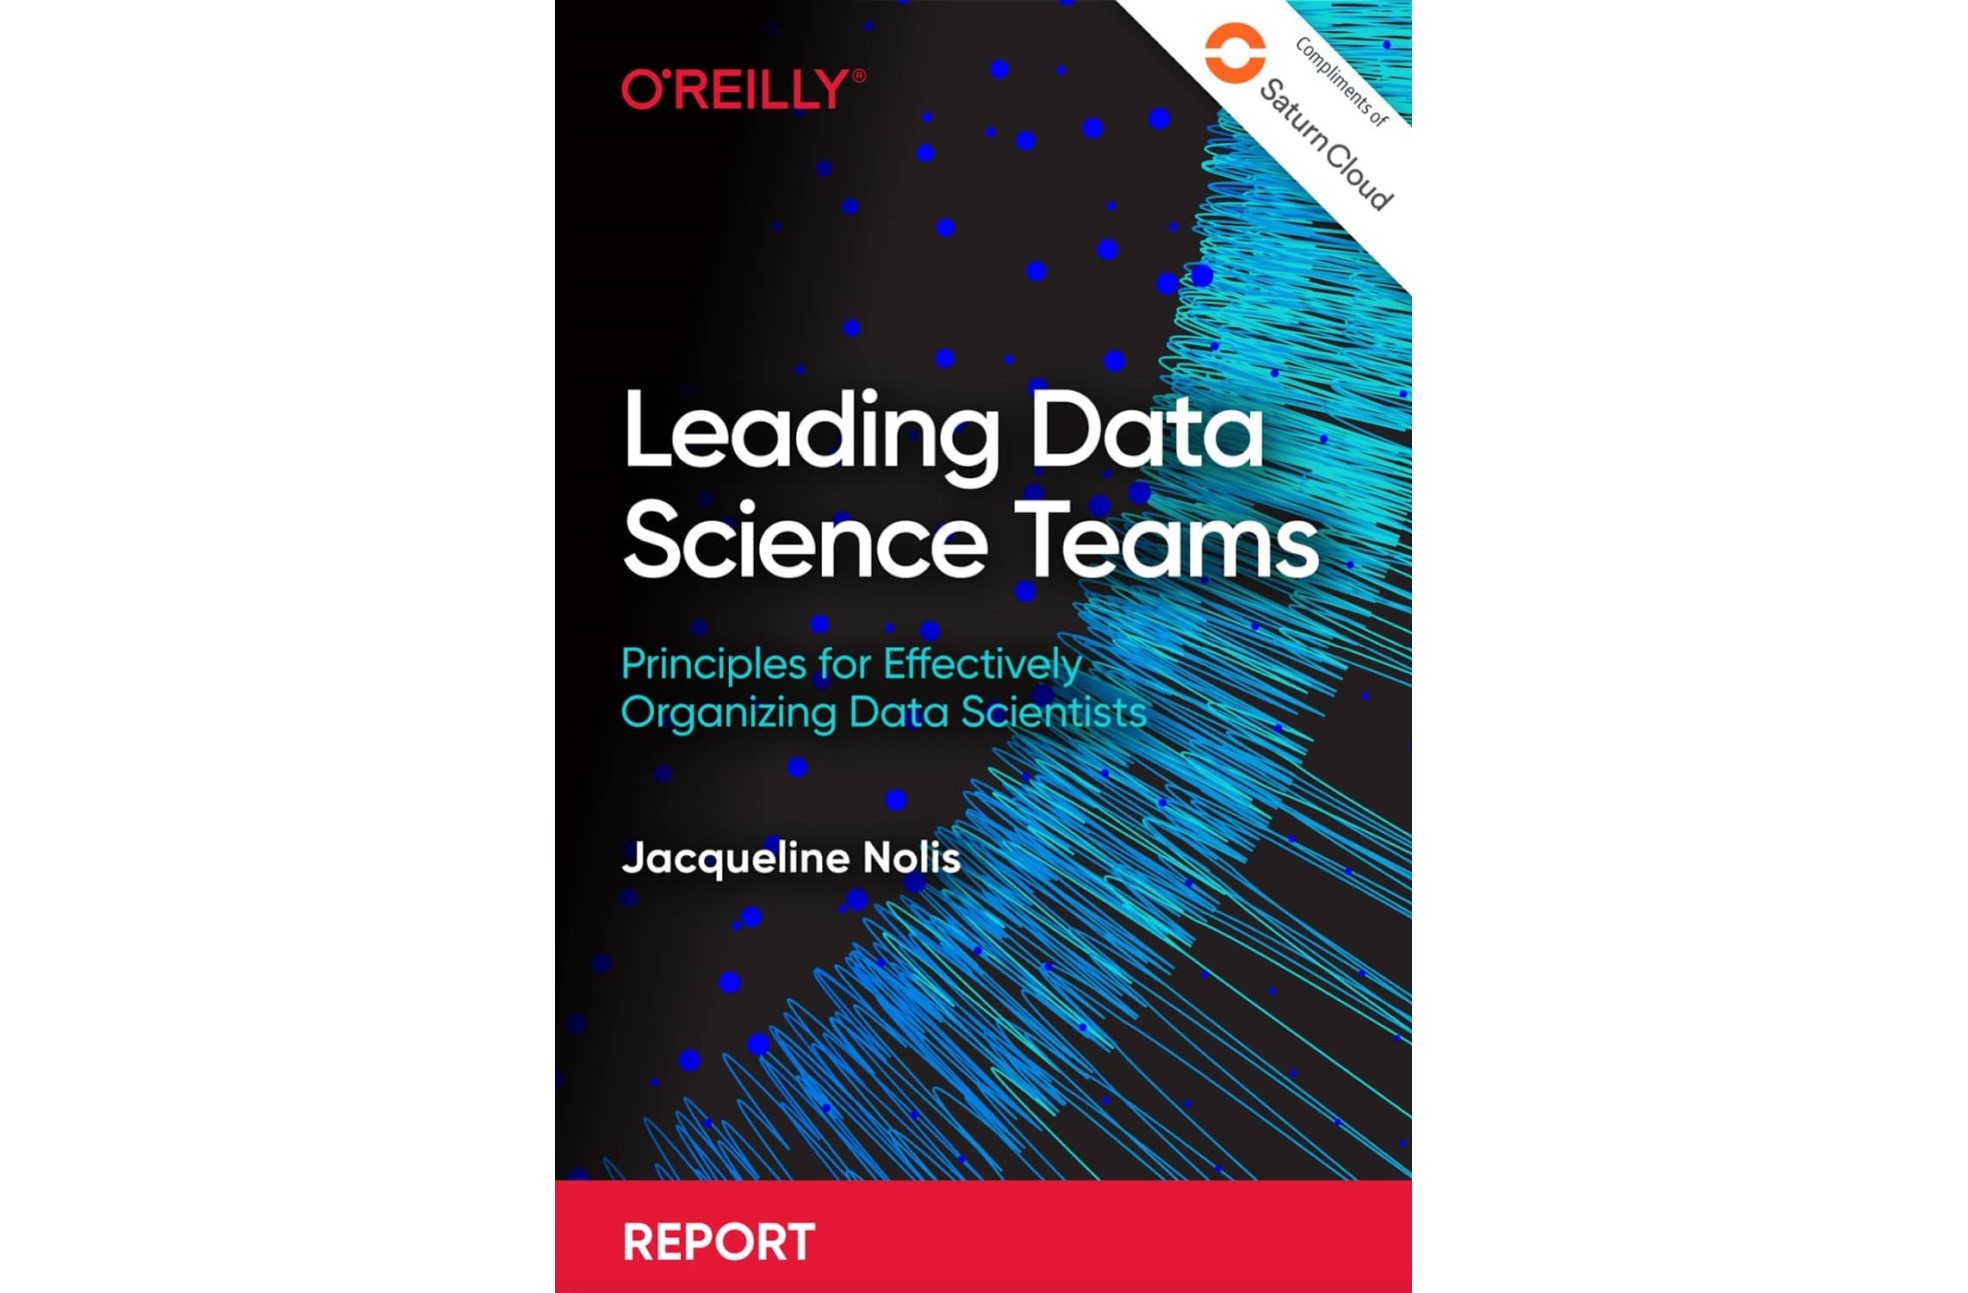 O'reilly Report: Leading Data Science Teams